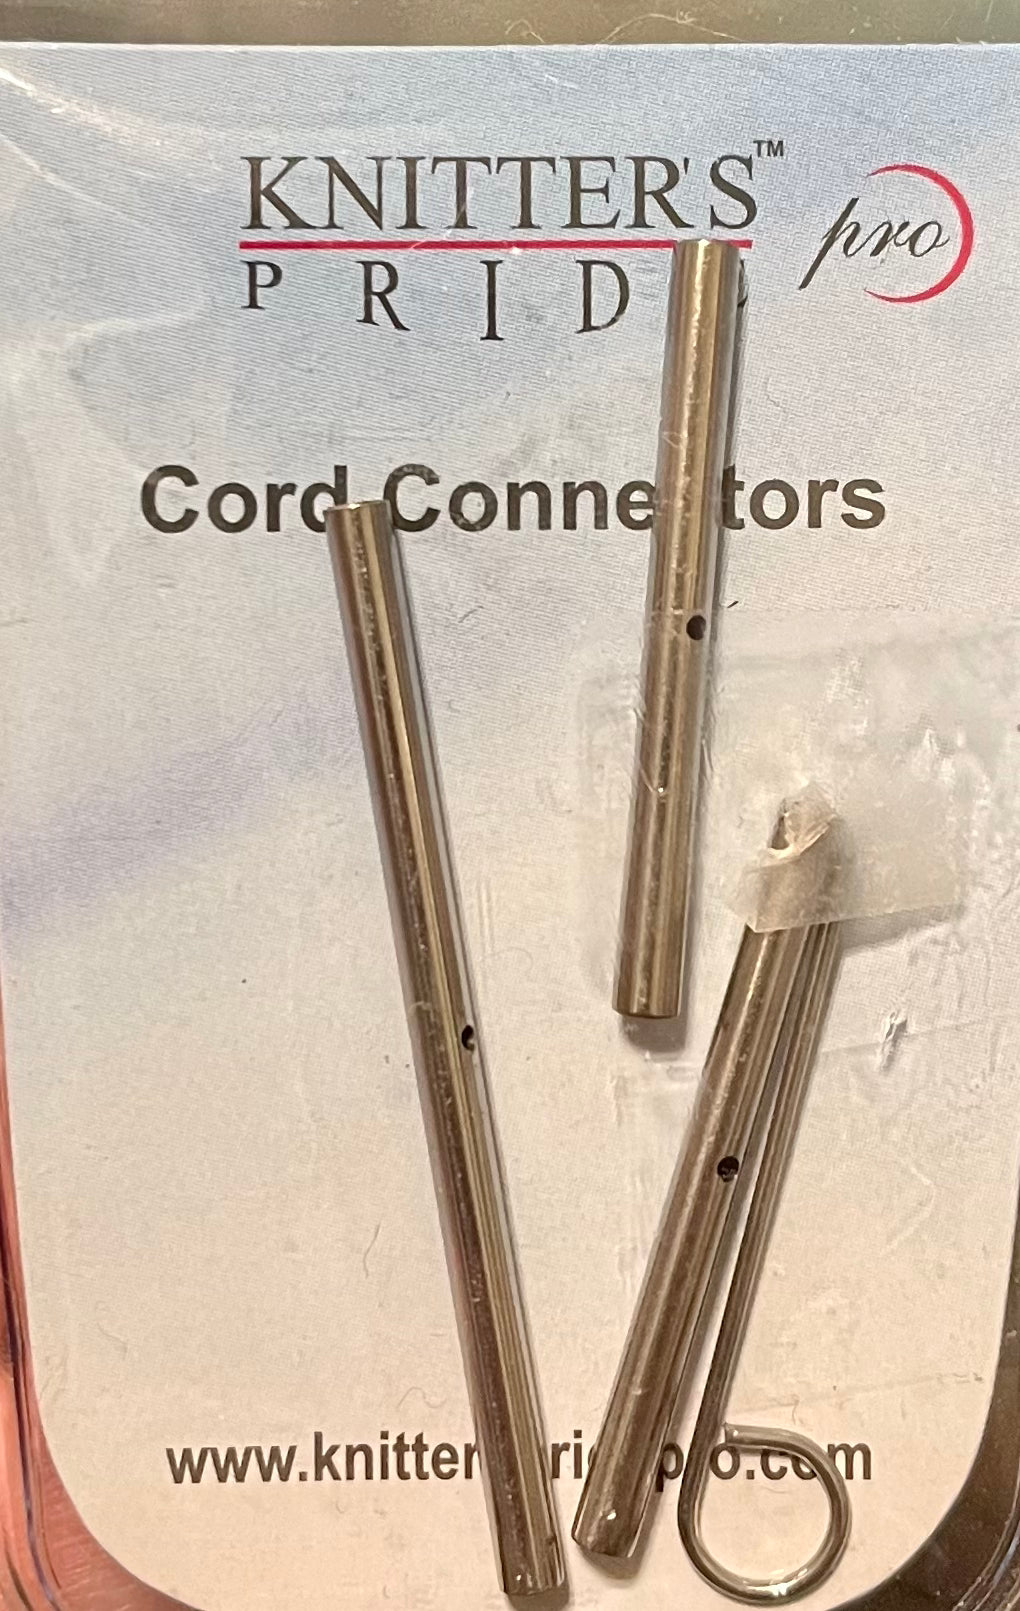 Cord Connectors (3) - Knitters Pride Pro